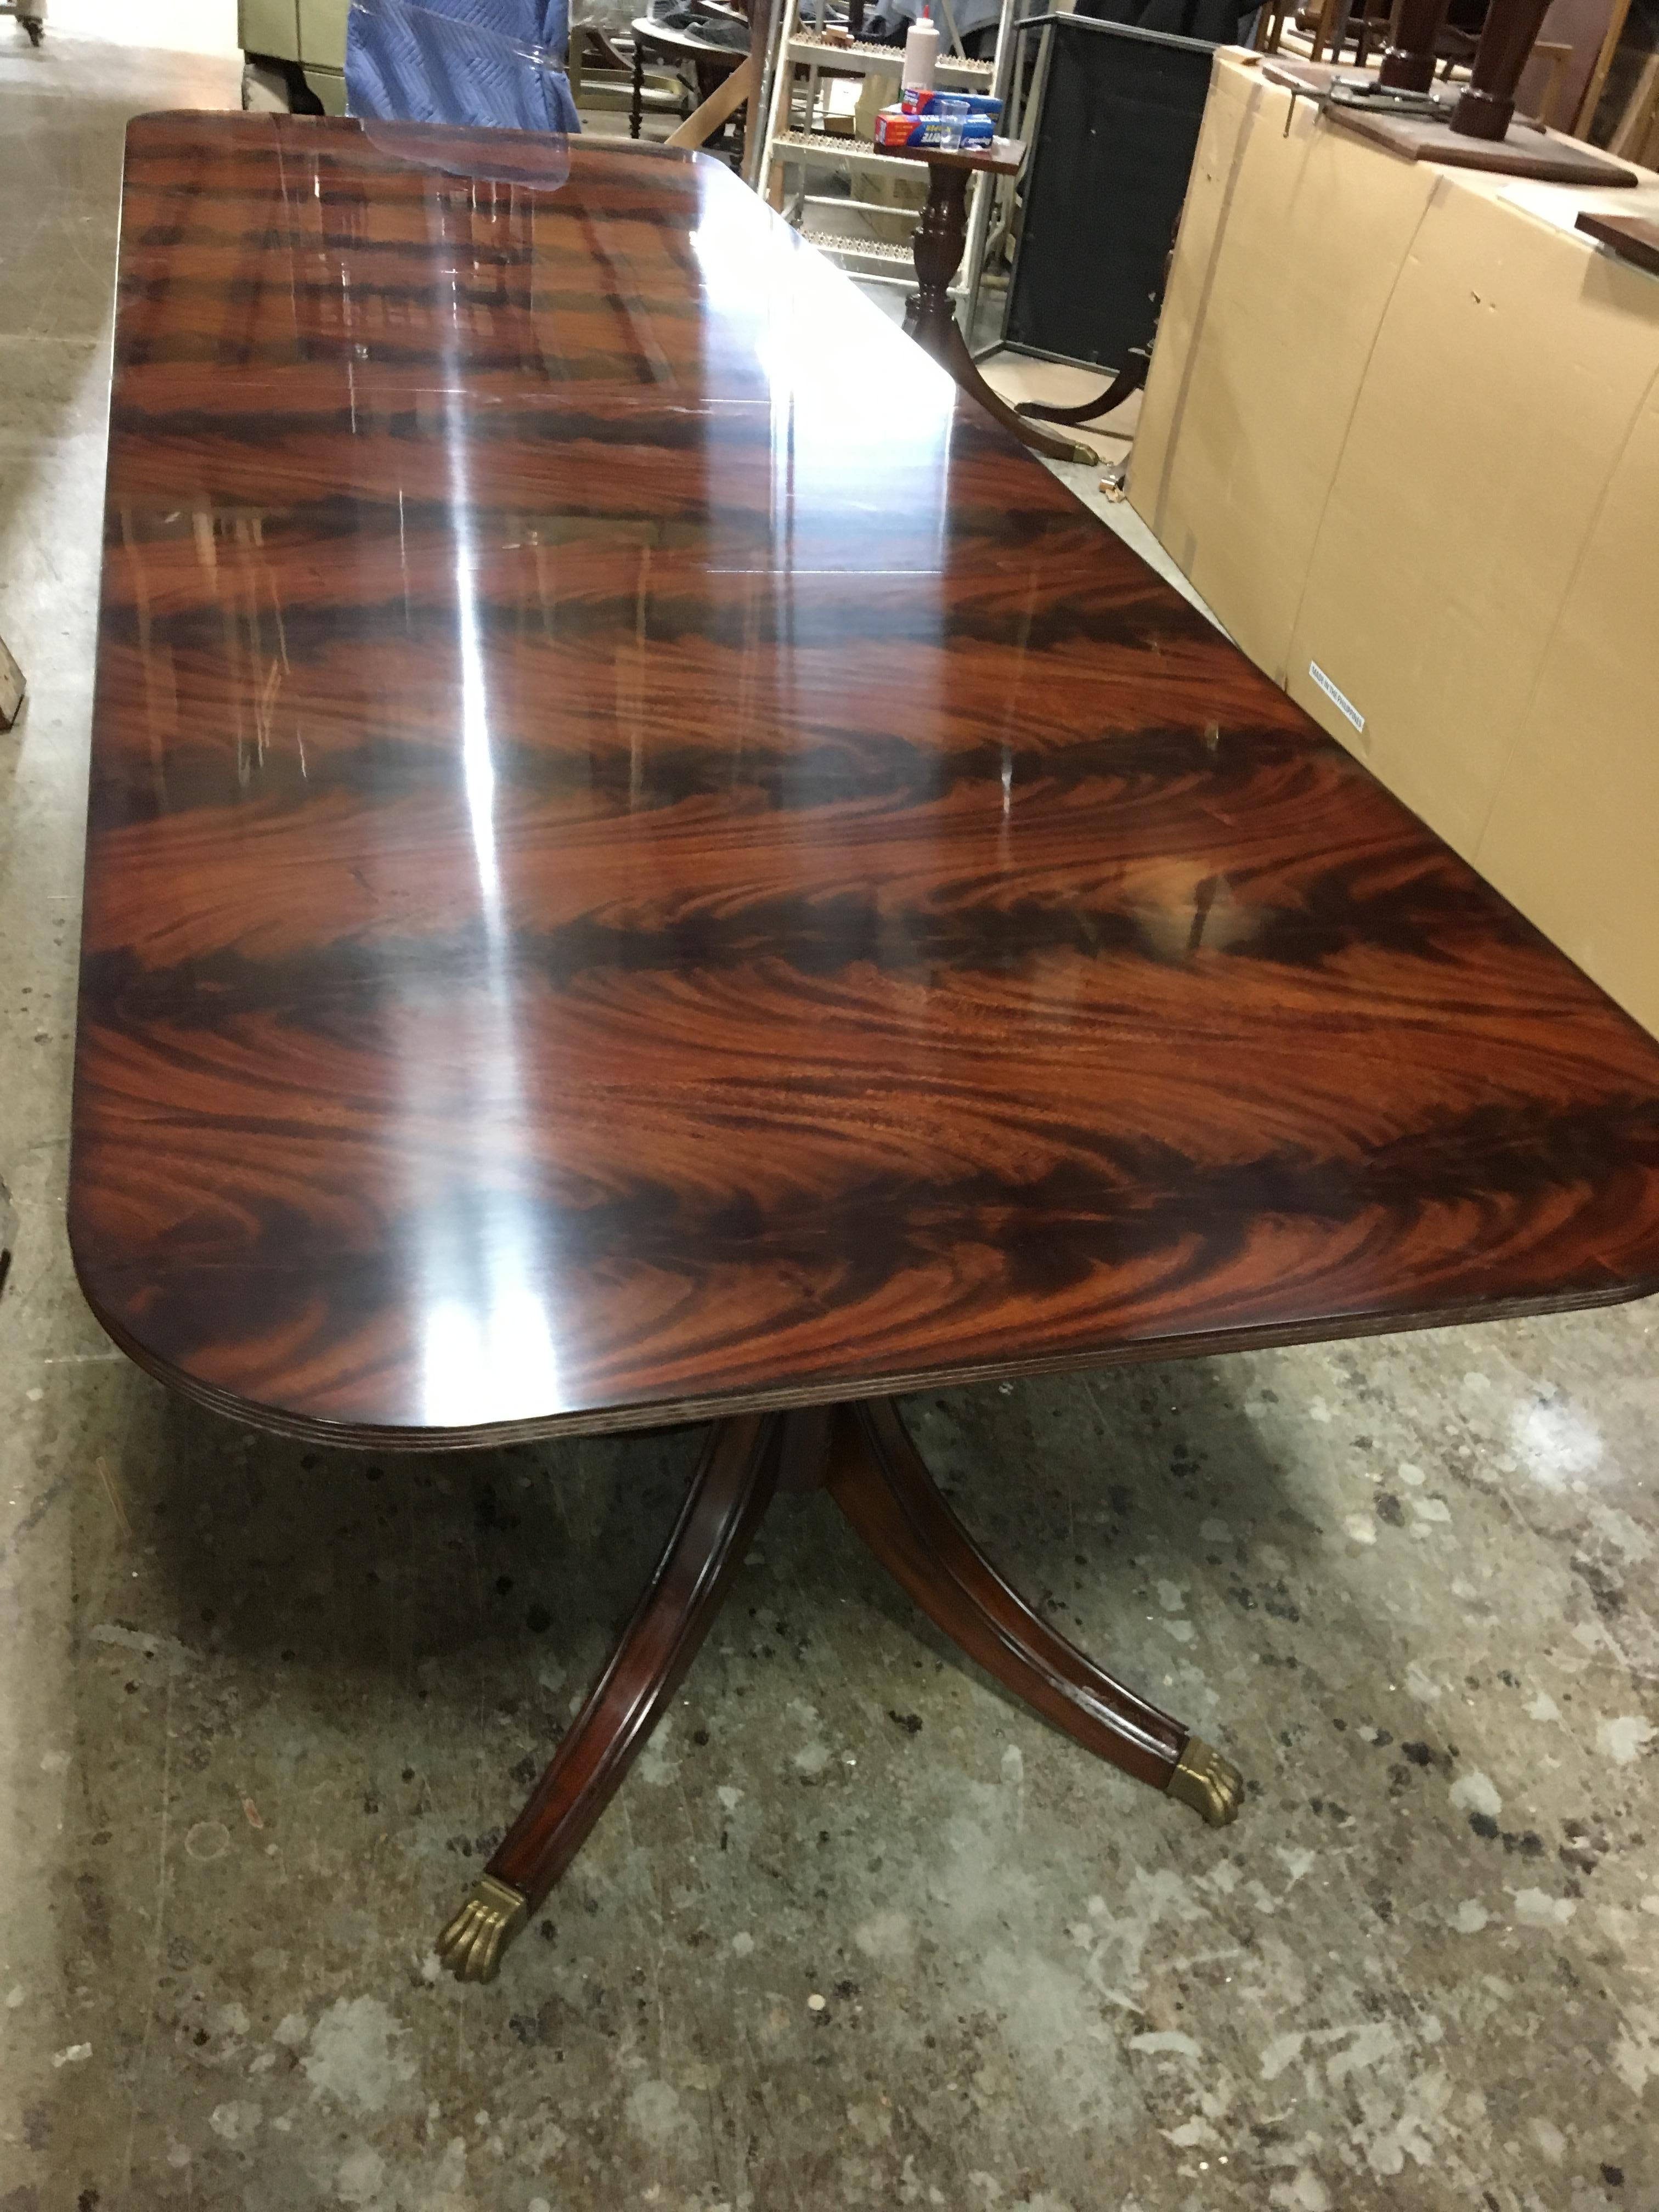 This is a made-to-order traditional mahogany dining table made in the Leighton Hall shop. It features a field of reverse slip-matched swirly crotch mahogany from West Africa. It has a hand rubbed and polished semigloss finish. The Sheraton-style